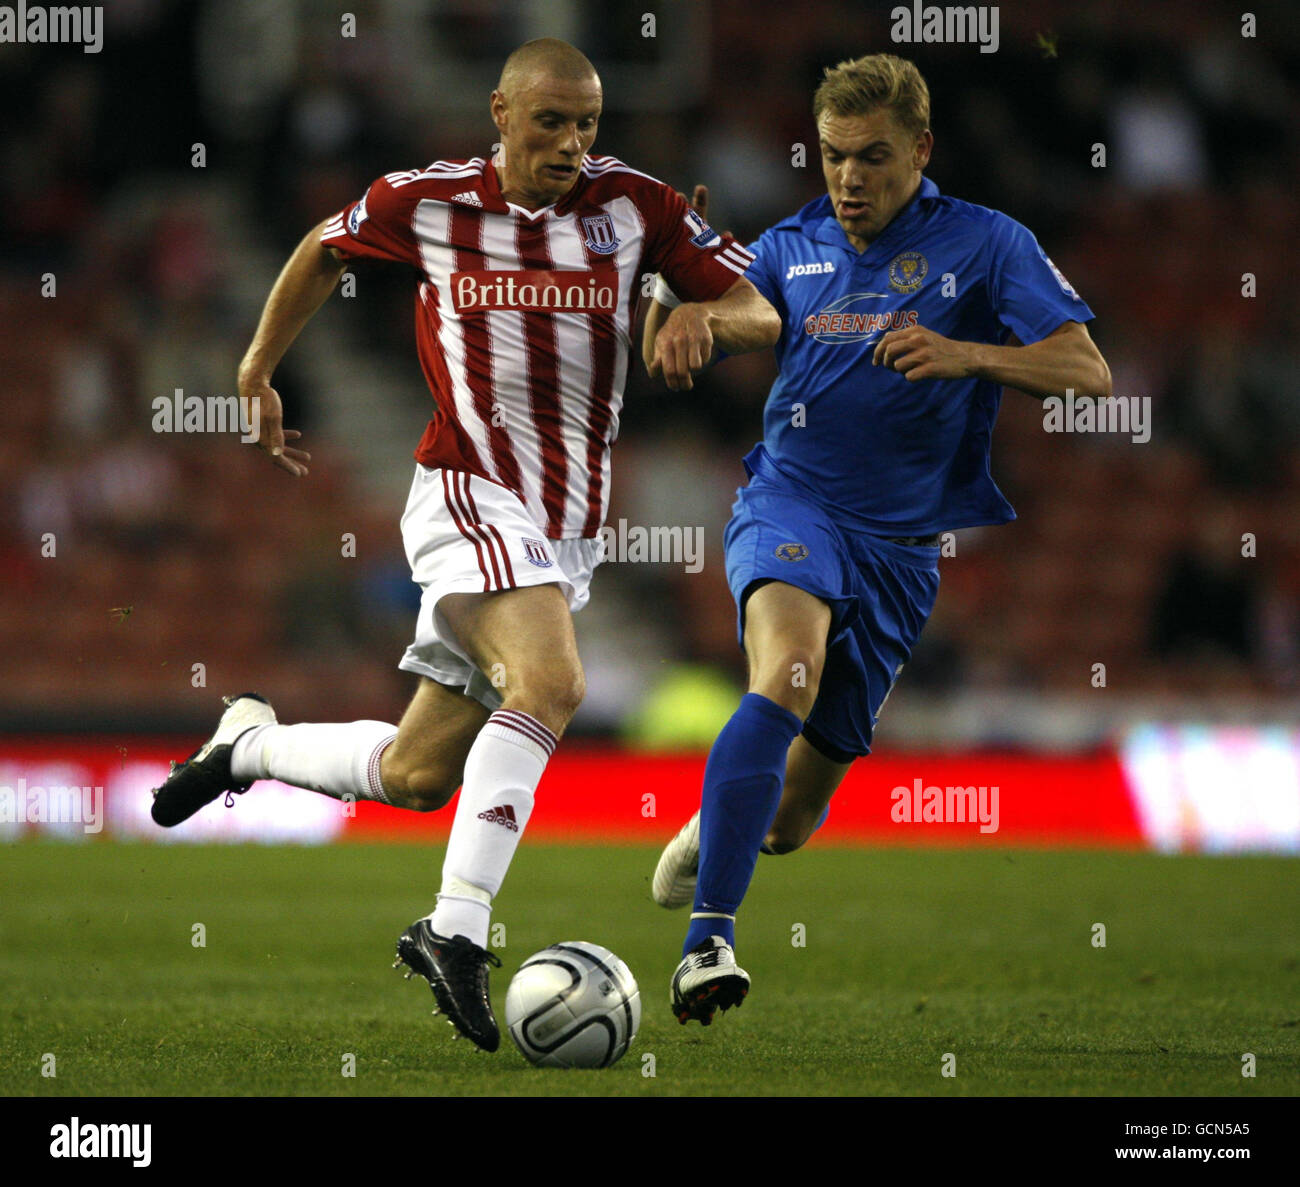 Stoke City's Ryan Shawcross (left) holds off a challenge from Shrewsbury Town's Benjamin Van Den Broek during the Carling Cup, Second Round match at the Britannia Stadium, Stoke. Stock Photo